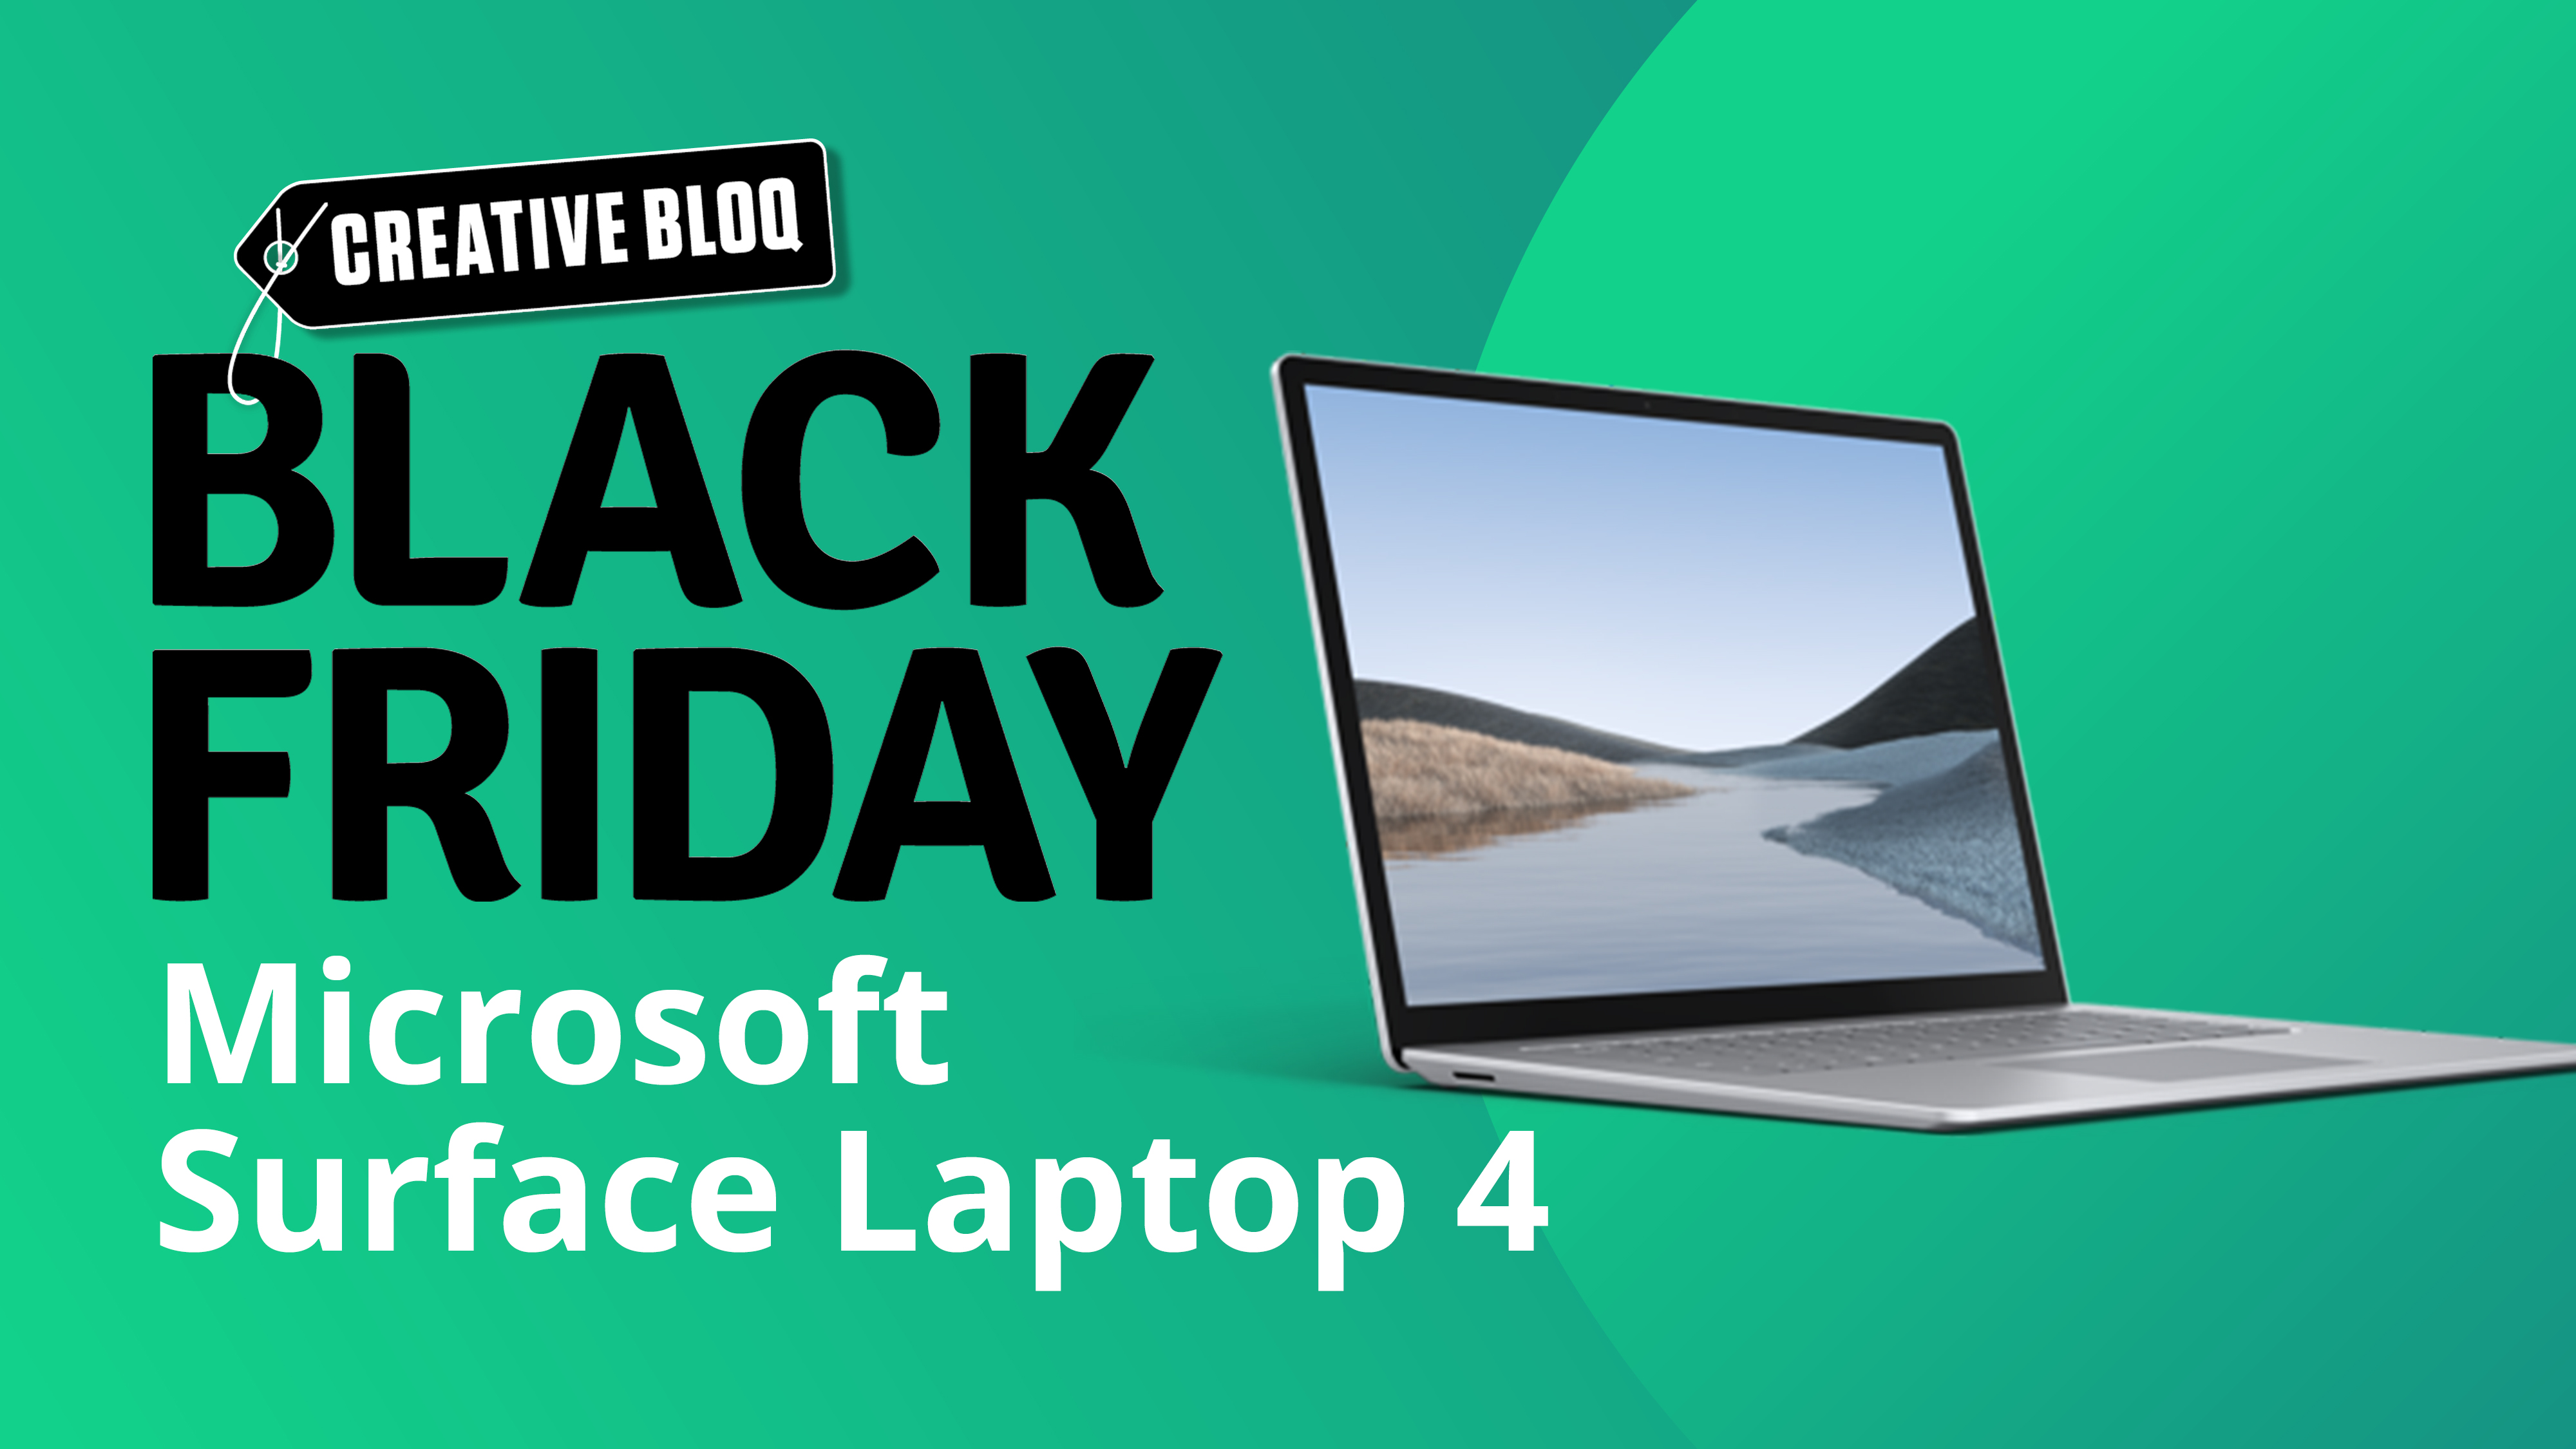 A Black Friday Microsoft Surface deal image, with a Microsoft Surface Laptop 4 on a green background